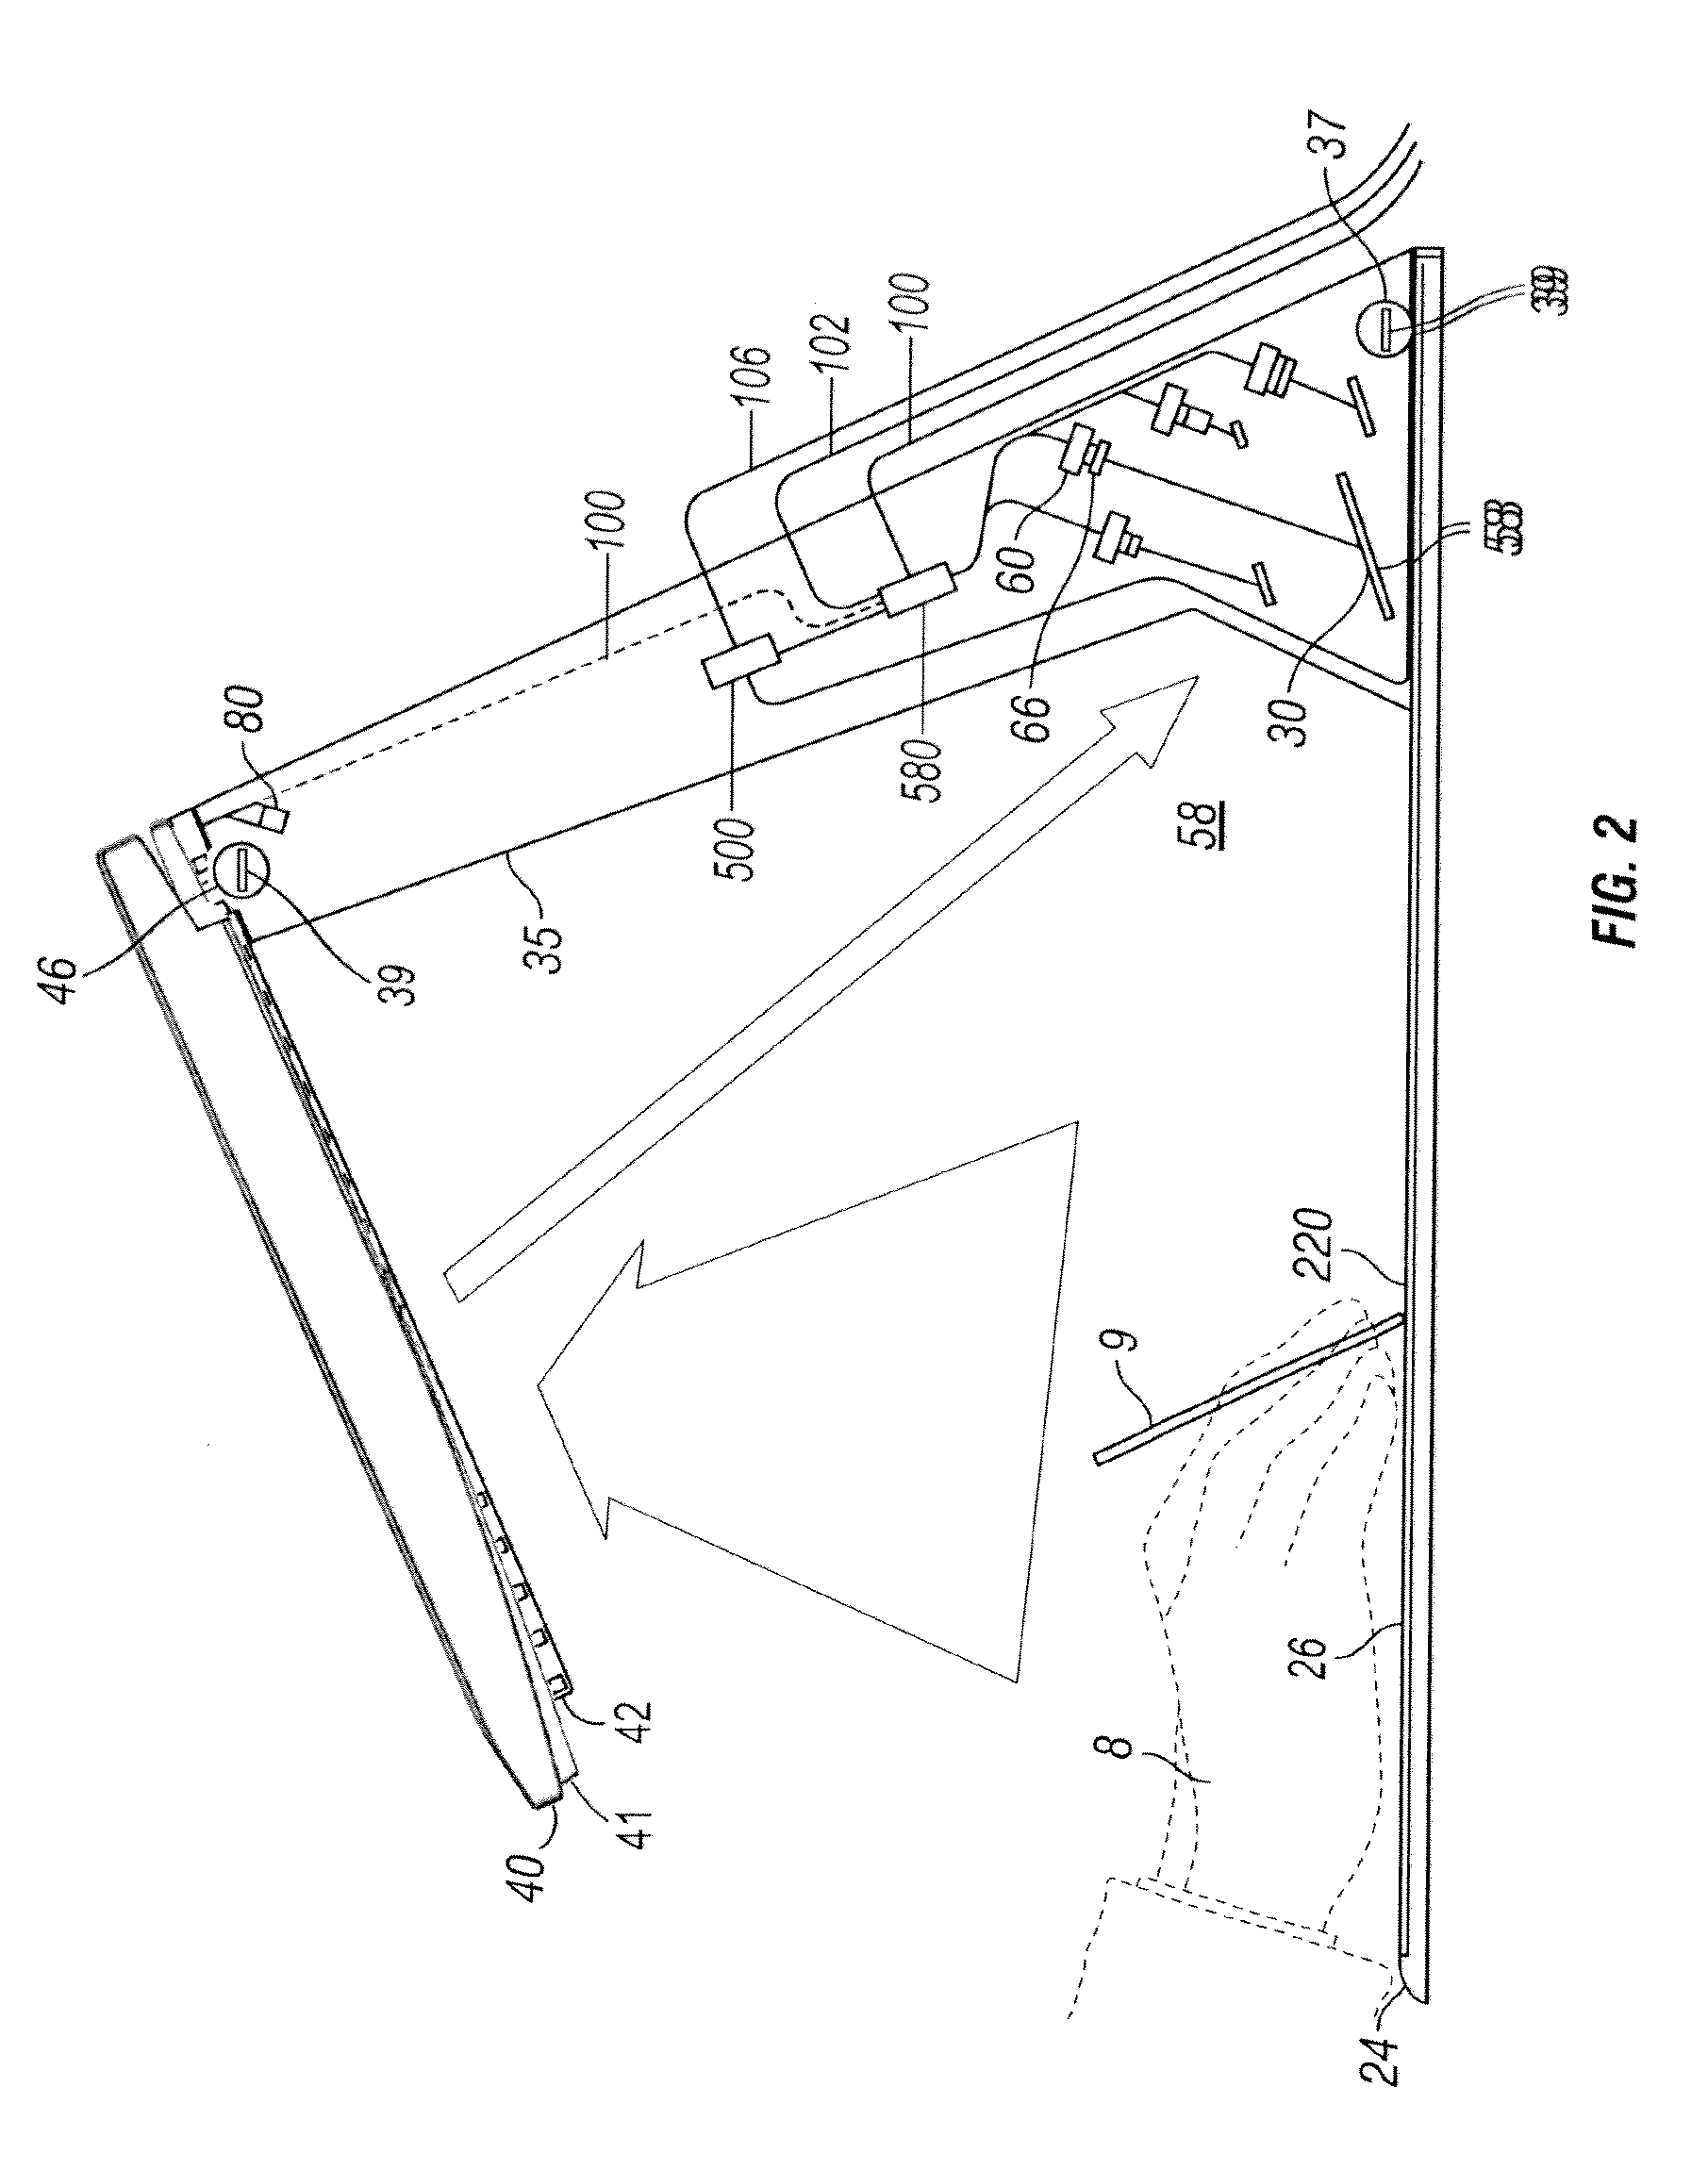 Input cueing emmersion system and method